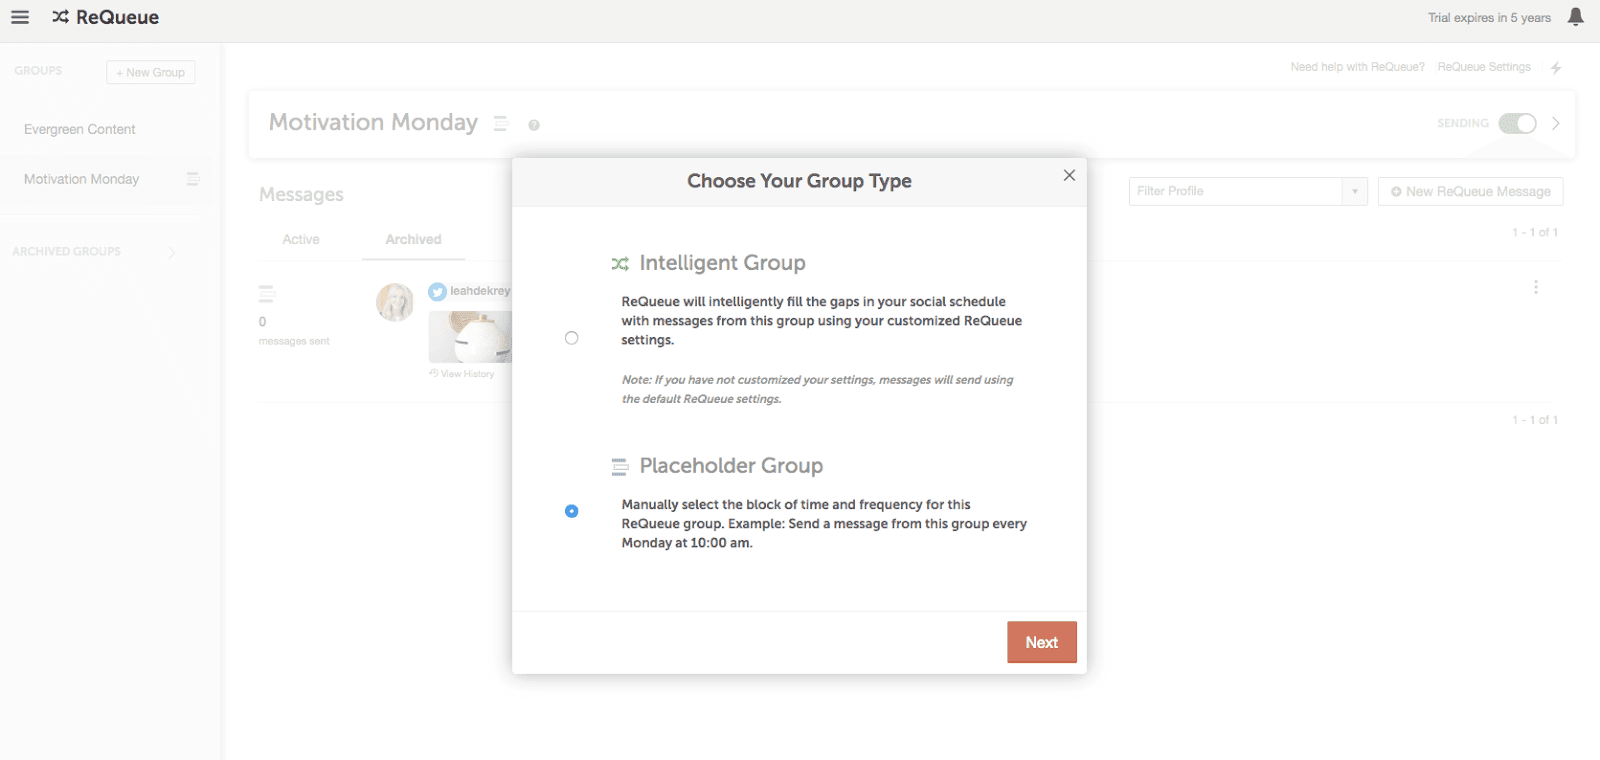 Choose your group type. Intelligent Group or Placeholder Group